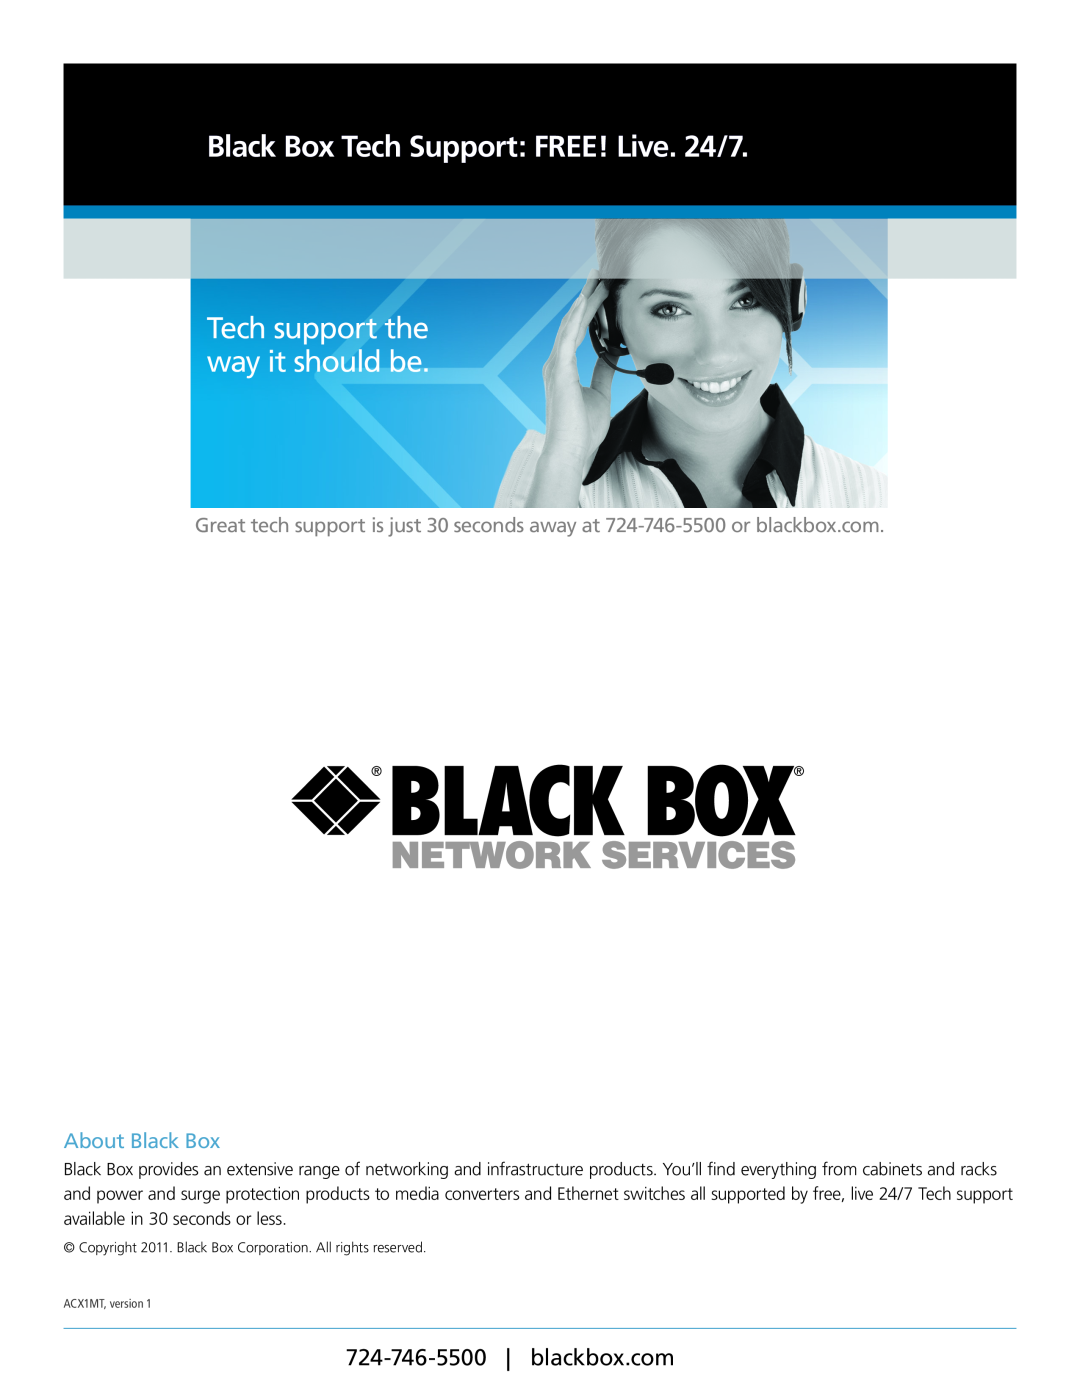 Black Box ACXMODH-RMK, ACX1MT Black Box Tech Support FREE! Live. 24/7, Tech support the way it should be, About Black Box 